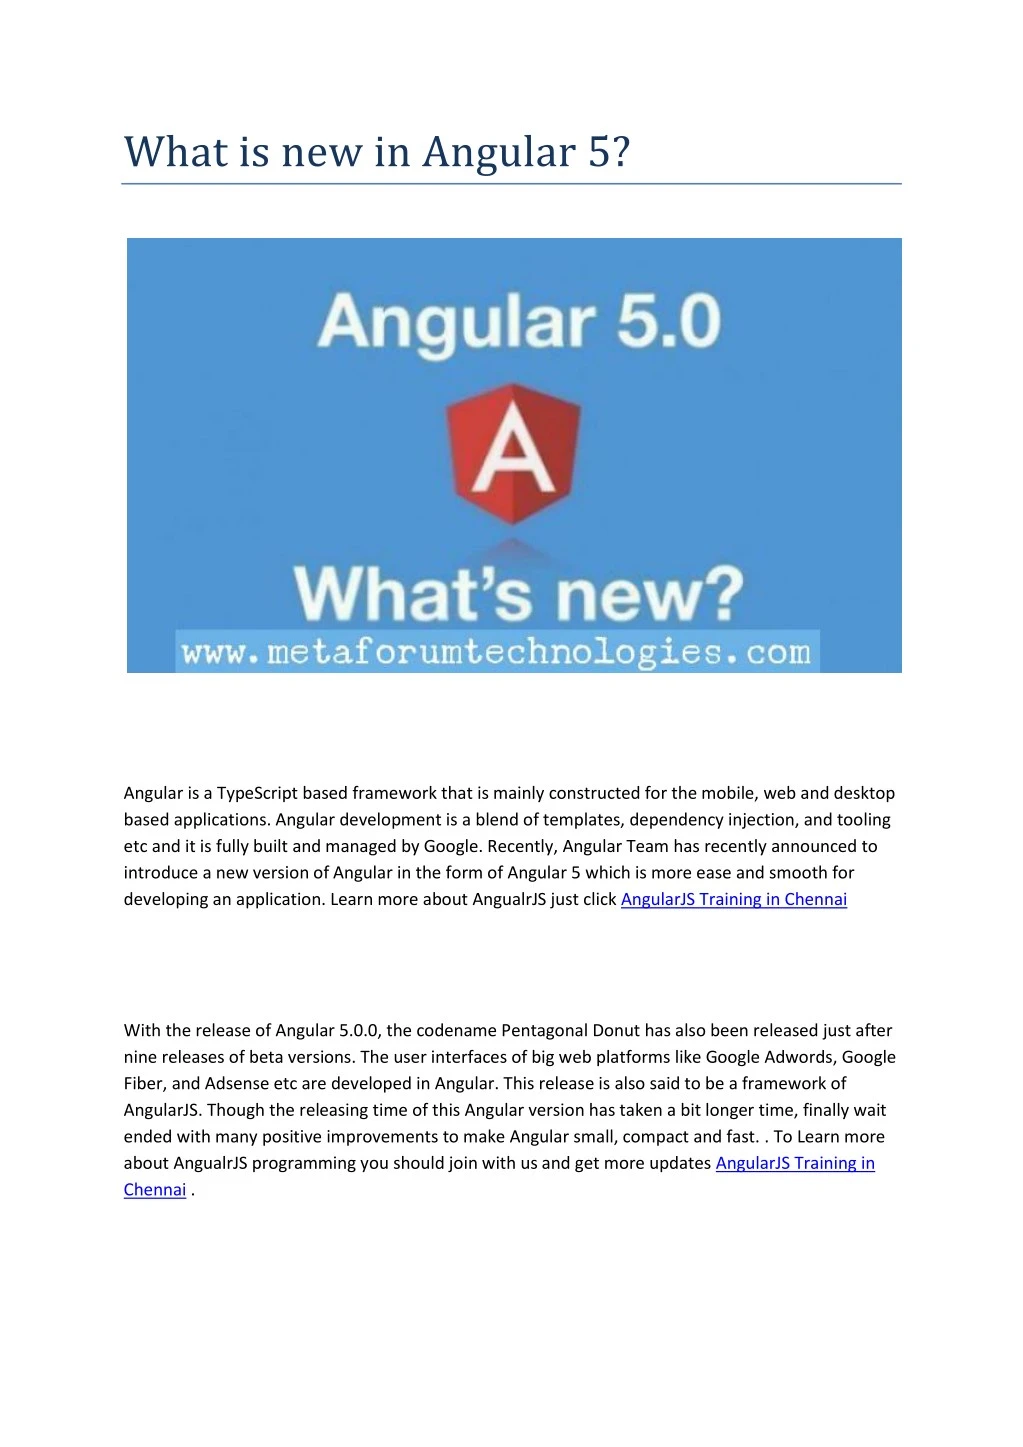 what is new in angular 5